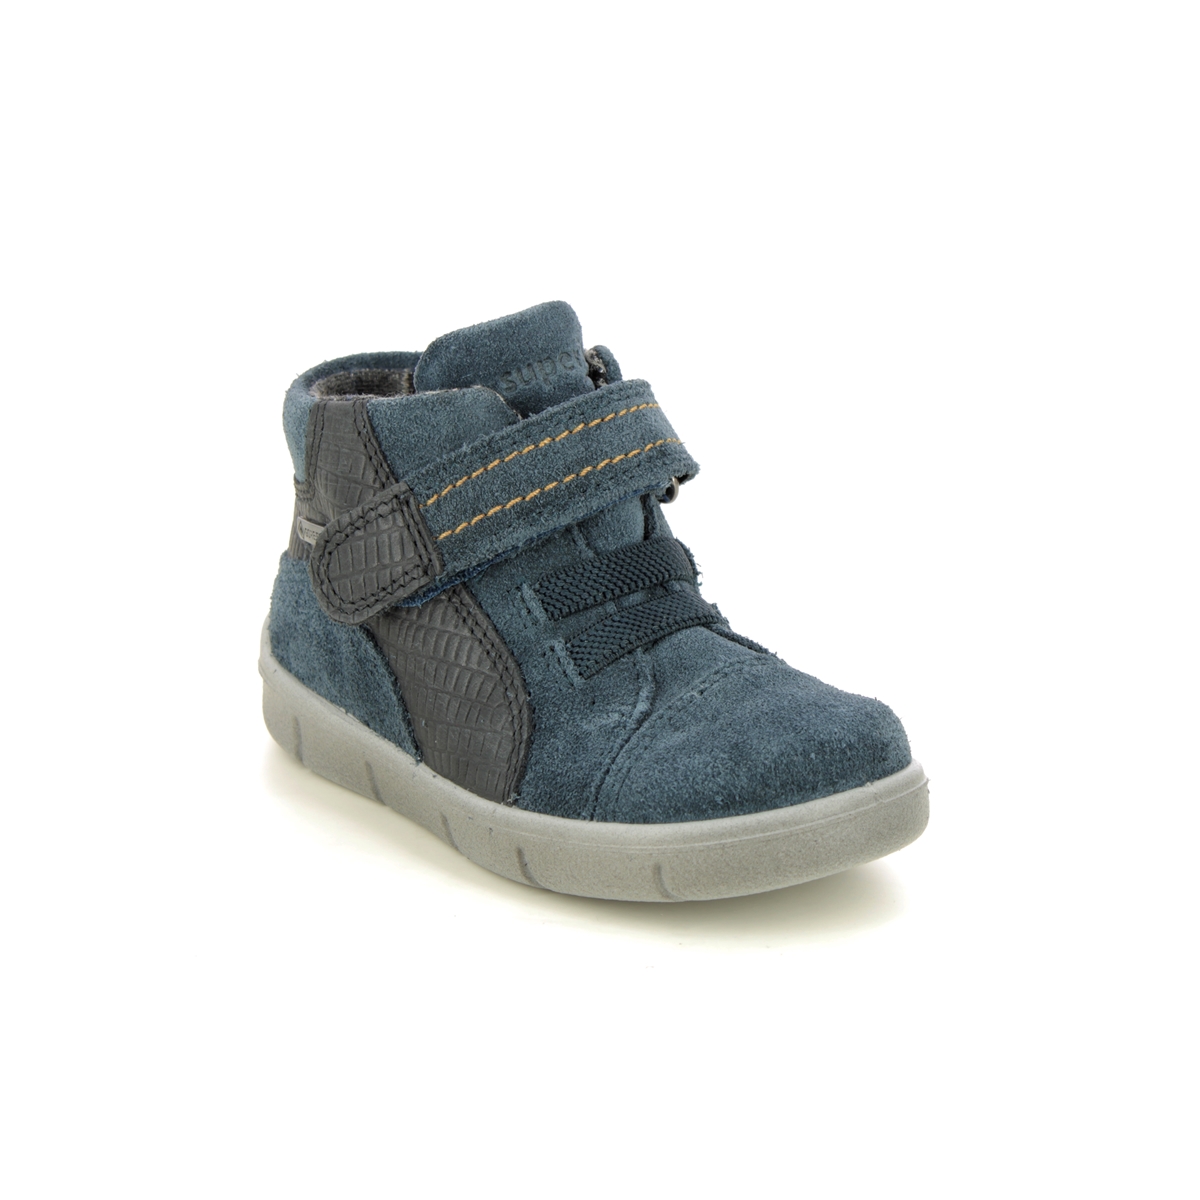 Superfit Ulli Bungee Gtx Blue Suede Kids Toddler Boys Boots 1009429-8000 In Size 25 In Plain Blue Suede For kids